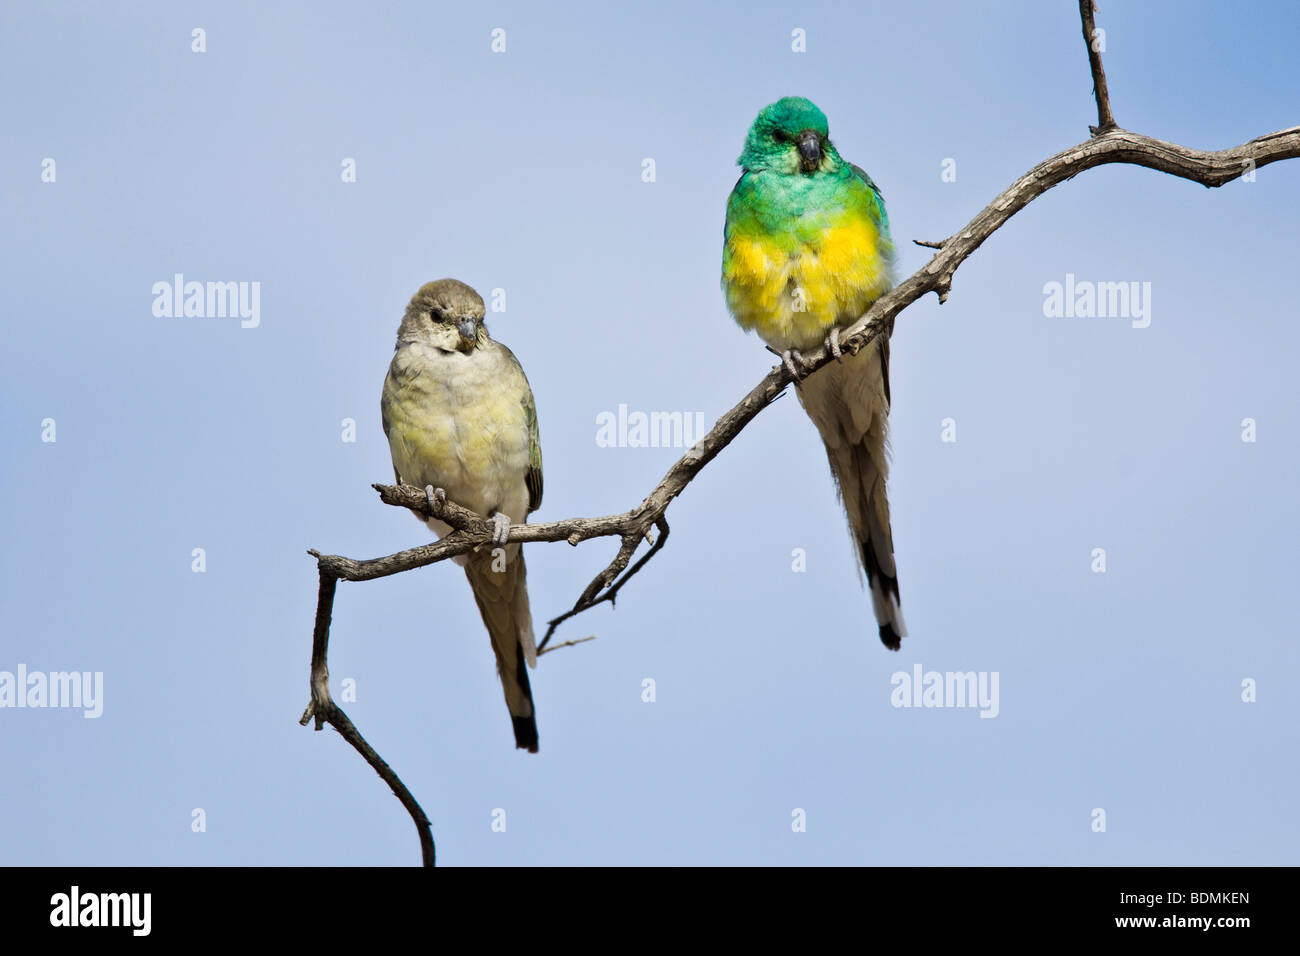 Red-rumped Parrots, male on right, South Australia Stock Photo